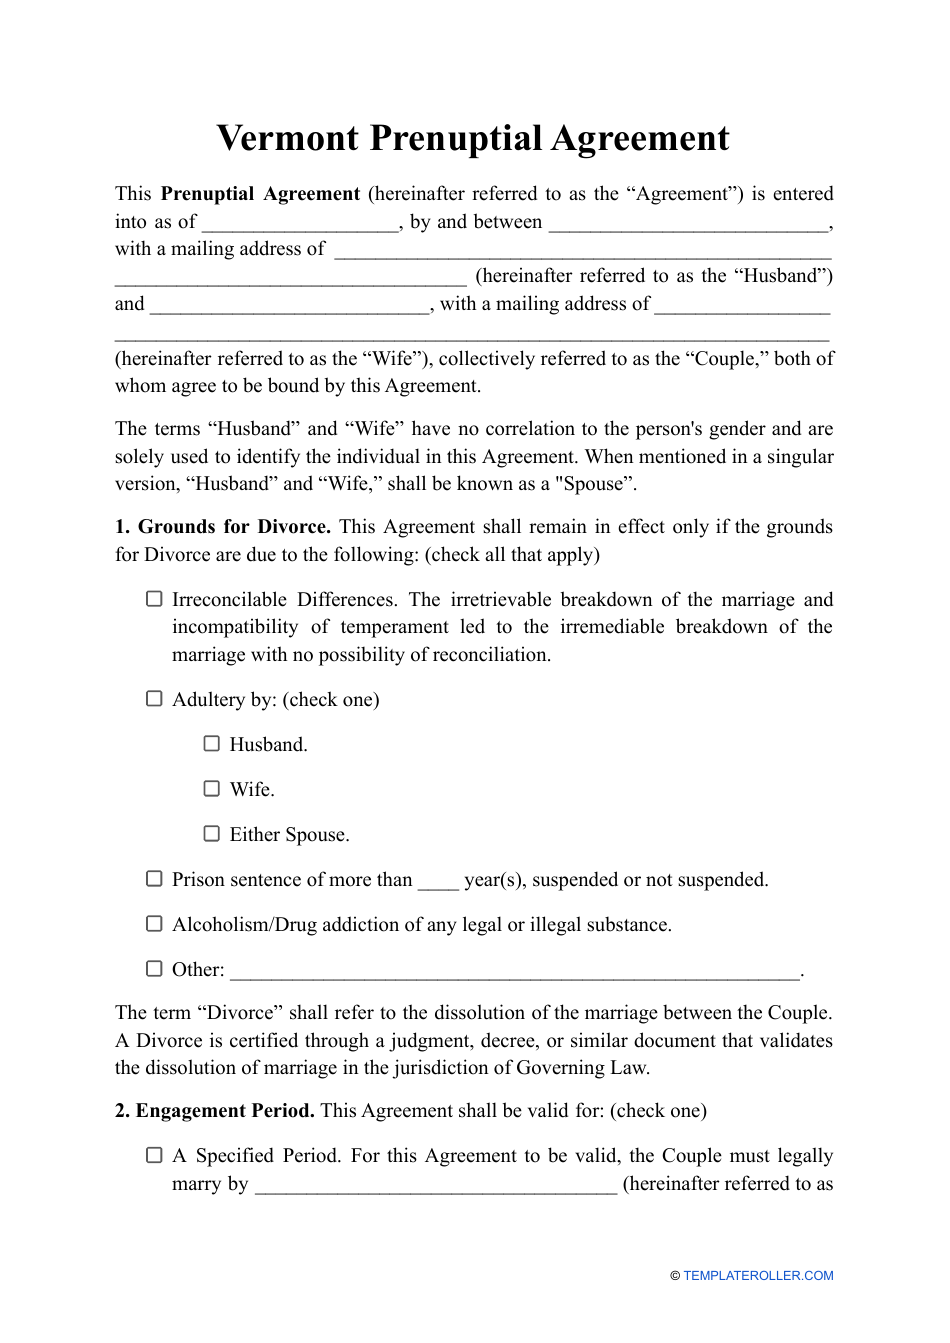 Prenuptial Agreement Template - Vermont, Page 1